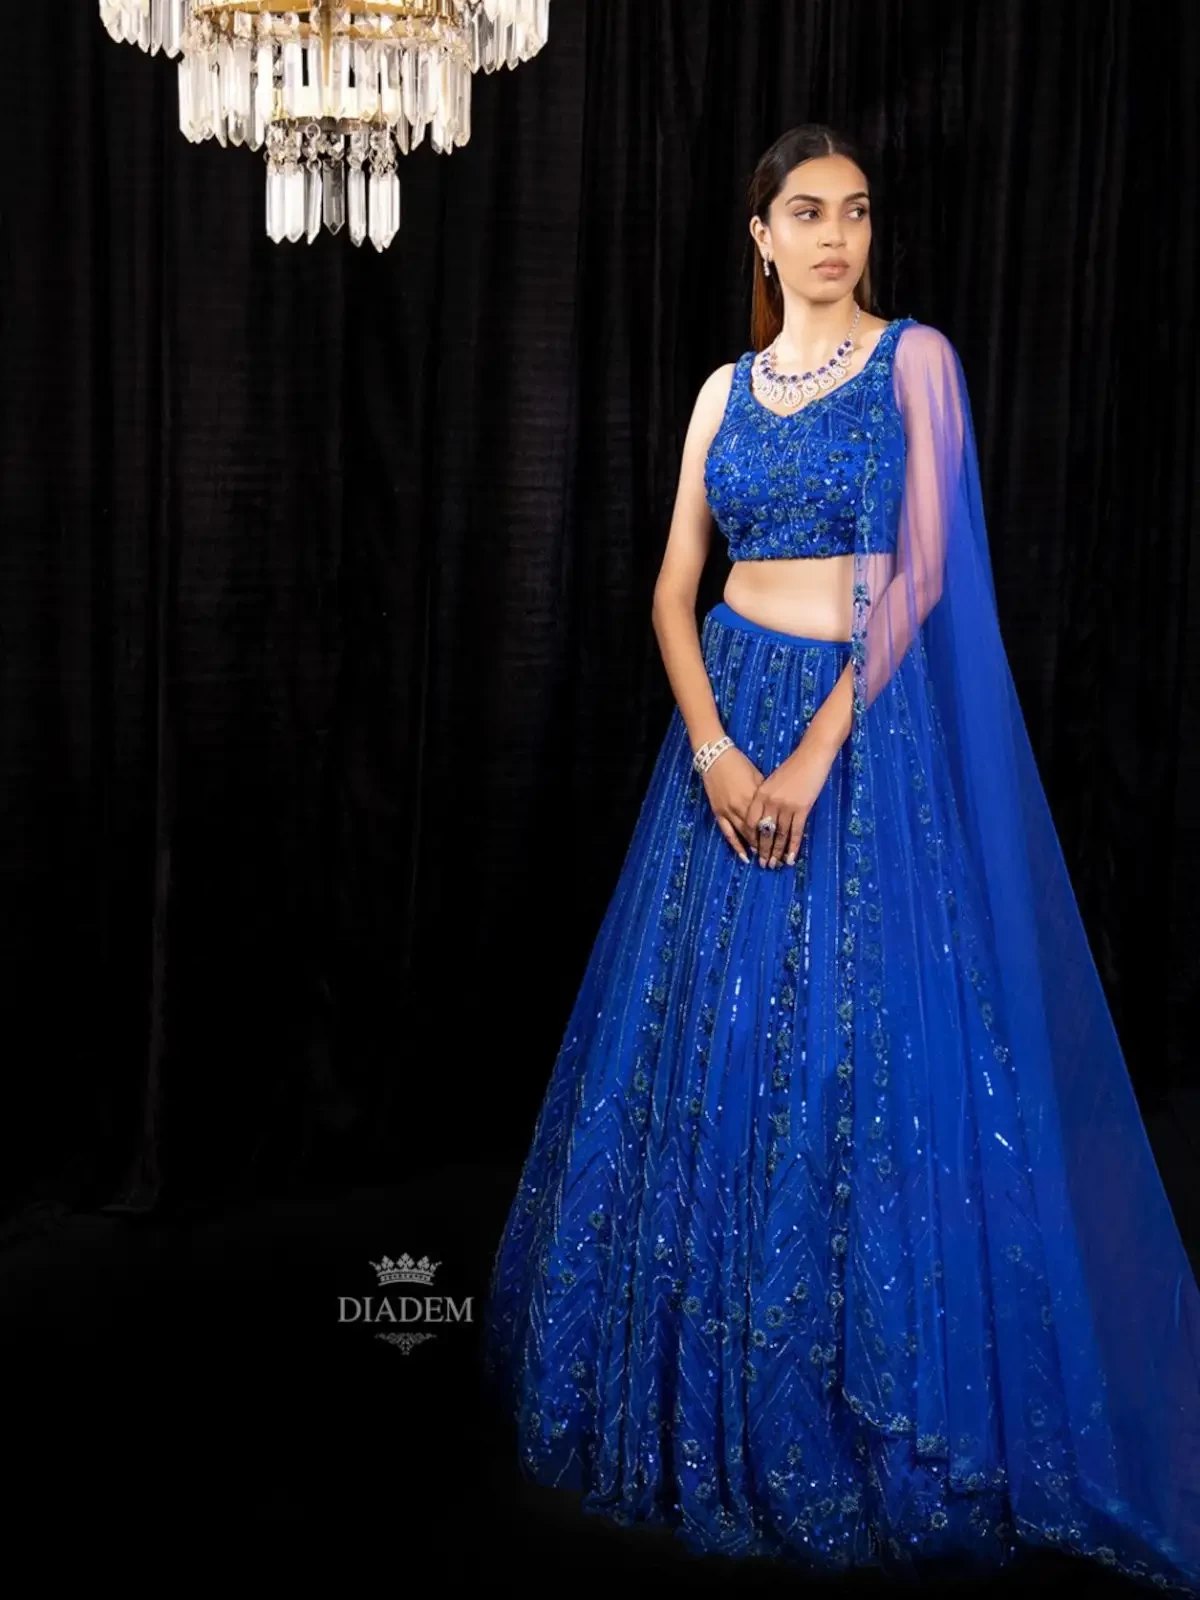 Royal Blue Lehenga Adorned In Floral Sequins And Beads With Dupatta